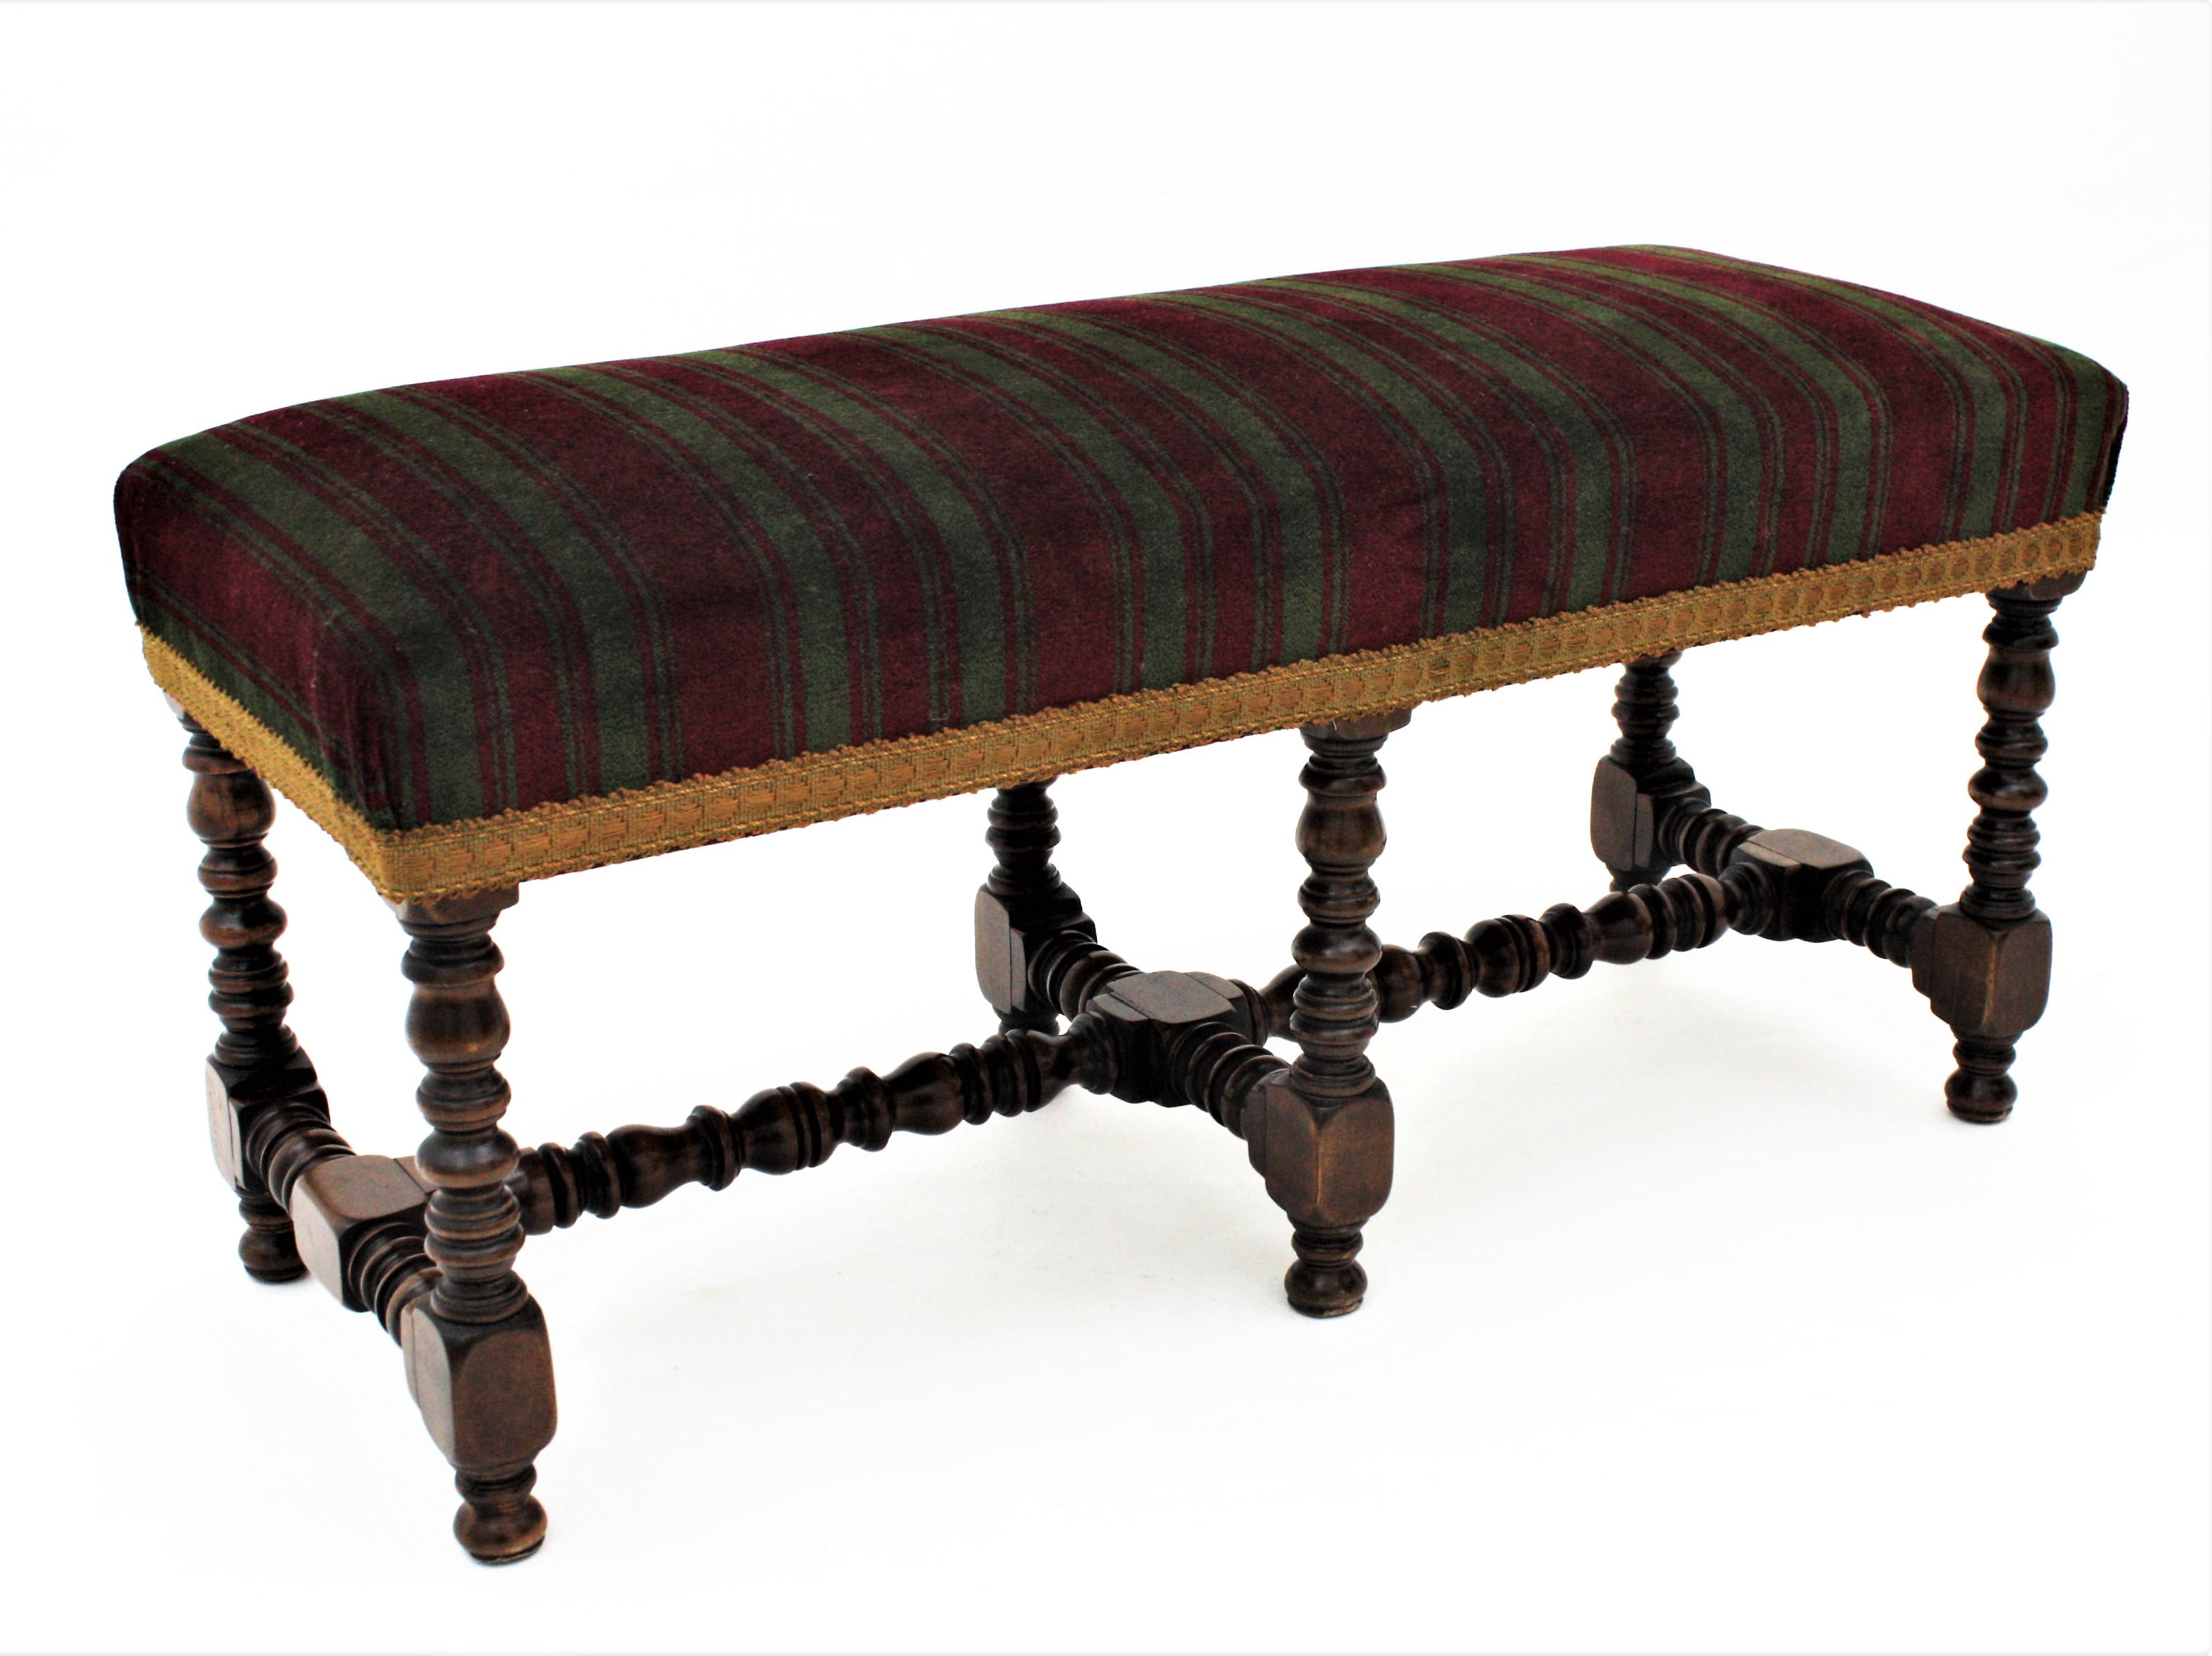 20th Century Louis XIII Style Turned Wood Long Bench / Stool by Valenti, Spain 1940s For Sale